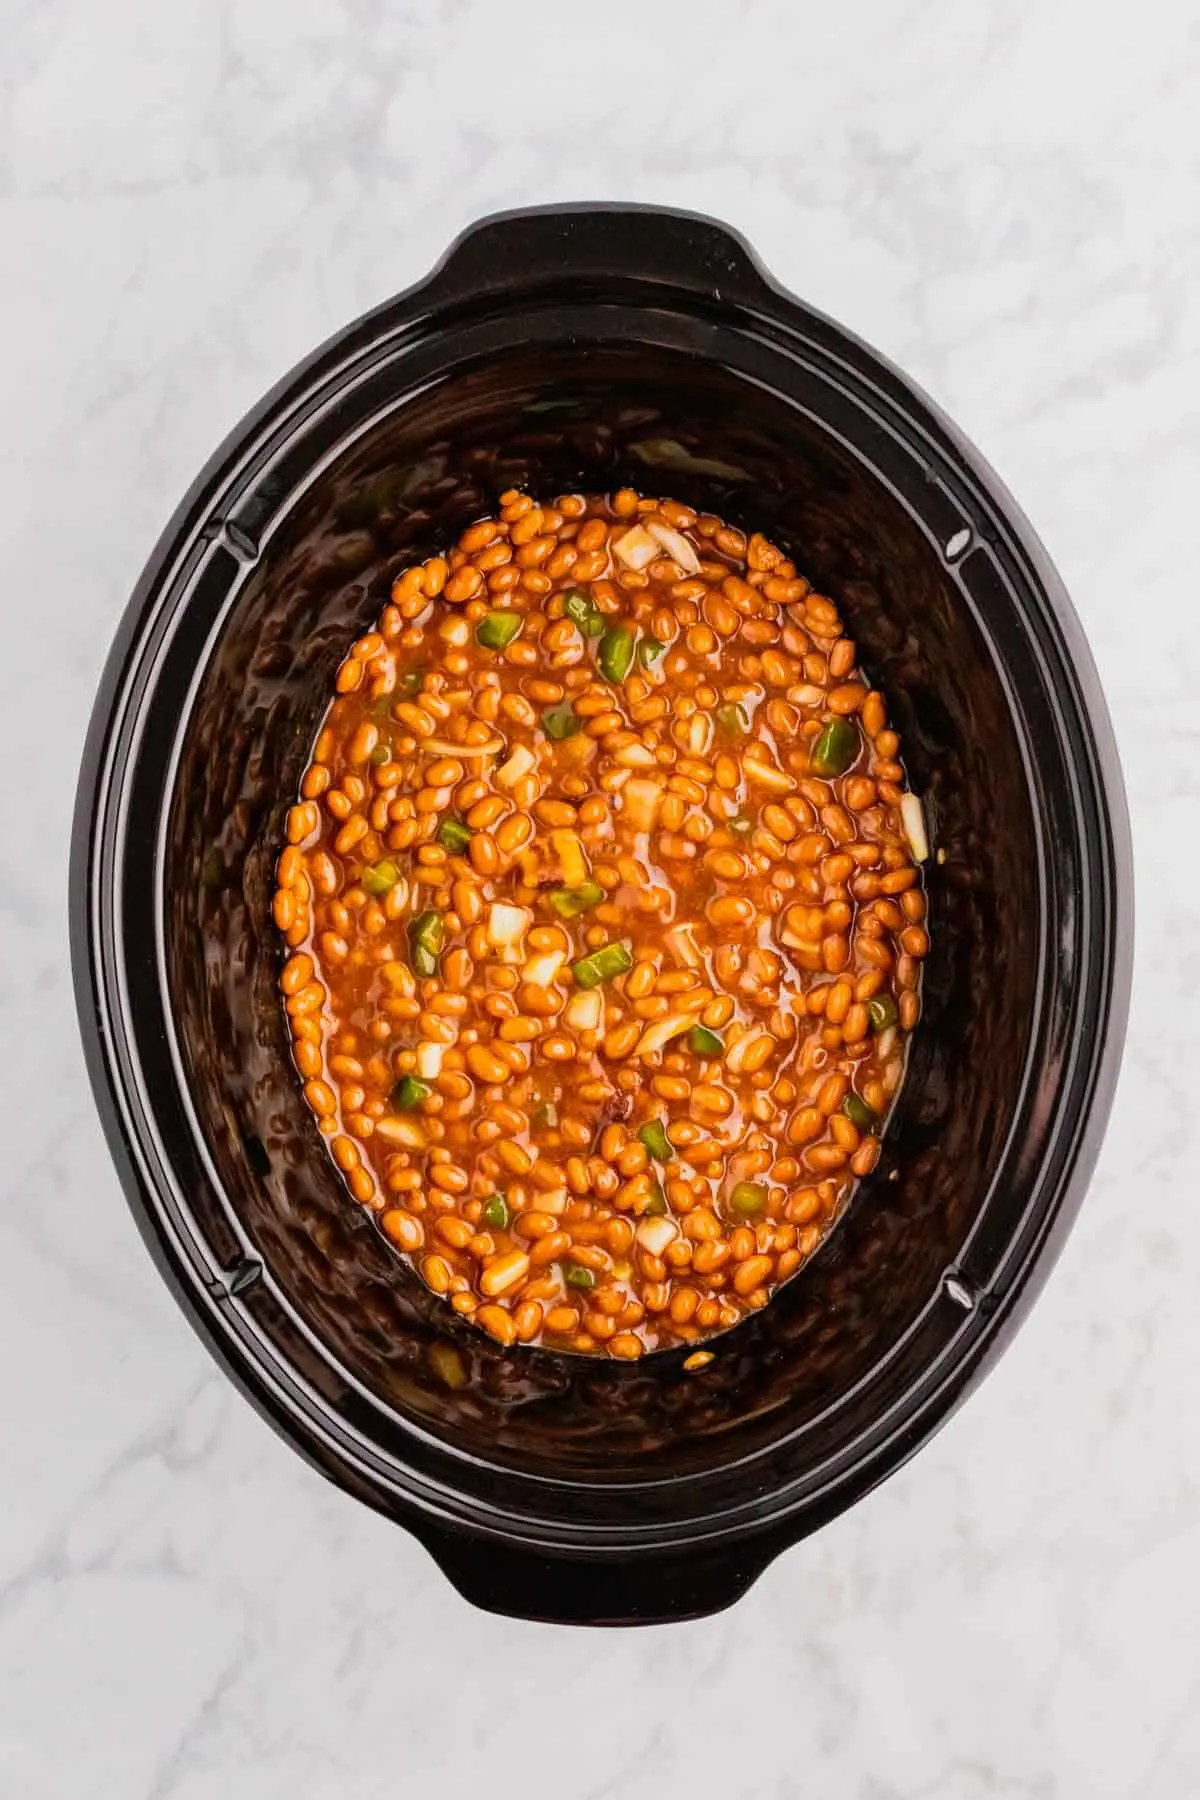 baked bean ingredients stirred together in a crock pot before cooking